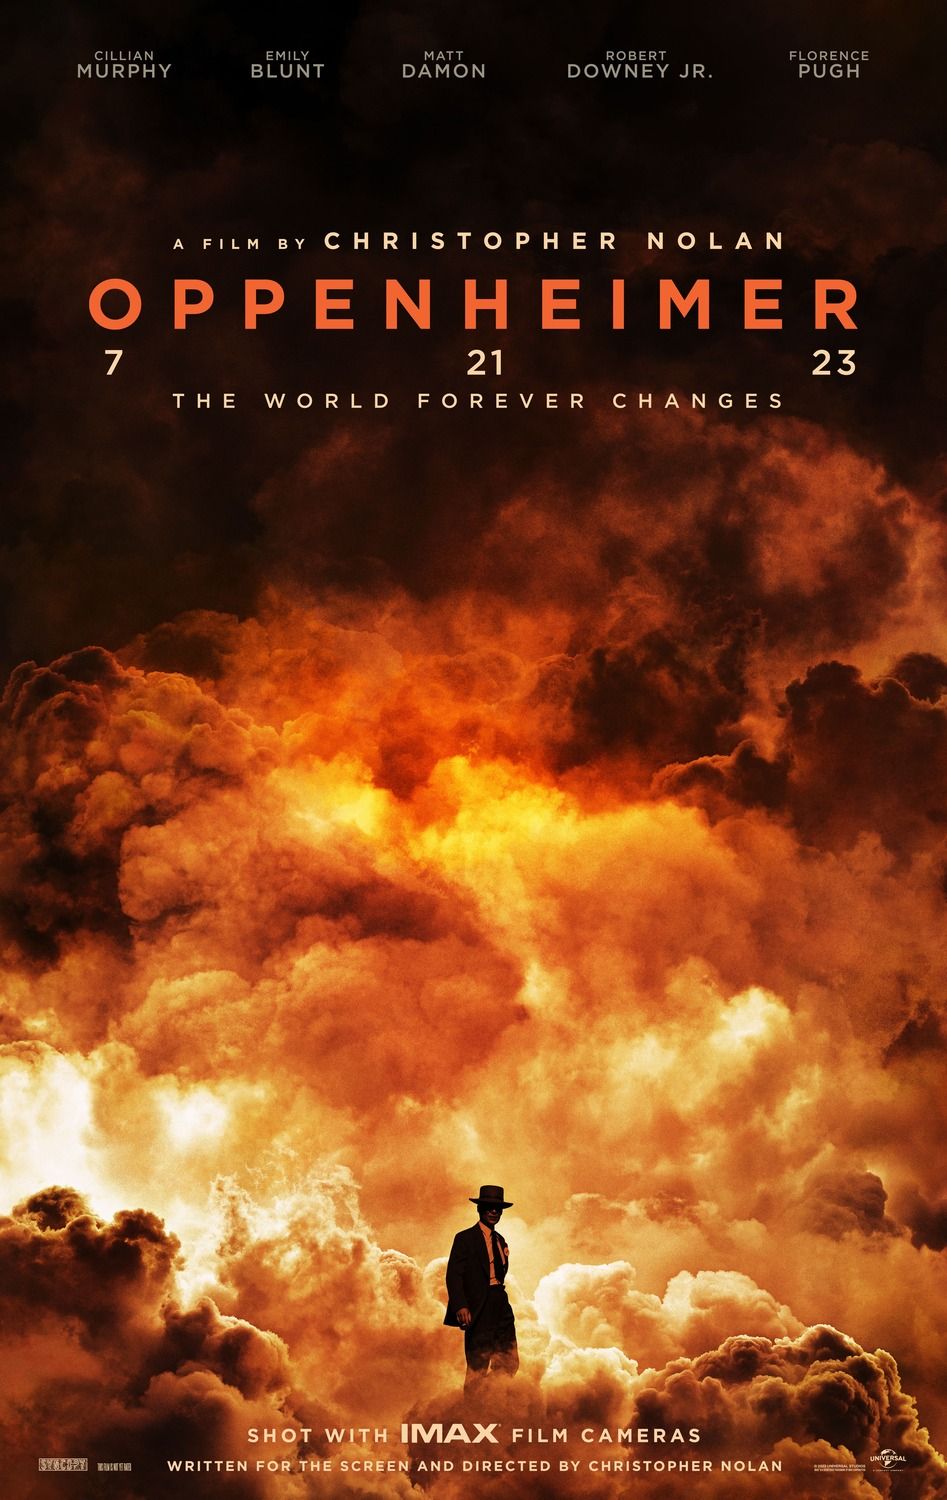 Oppenheimer 4K & Blu-ray Sold Out, Universal Working to Restock